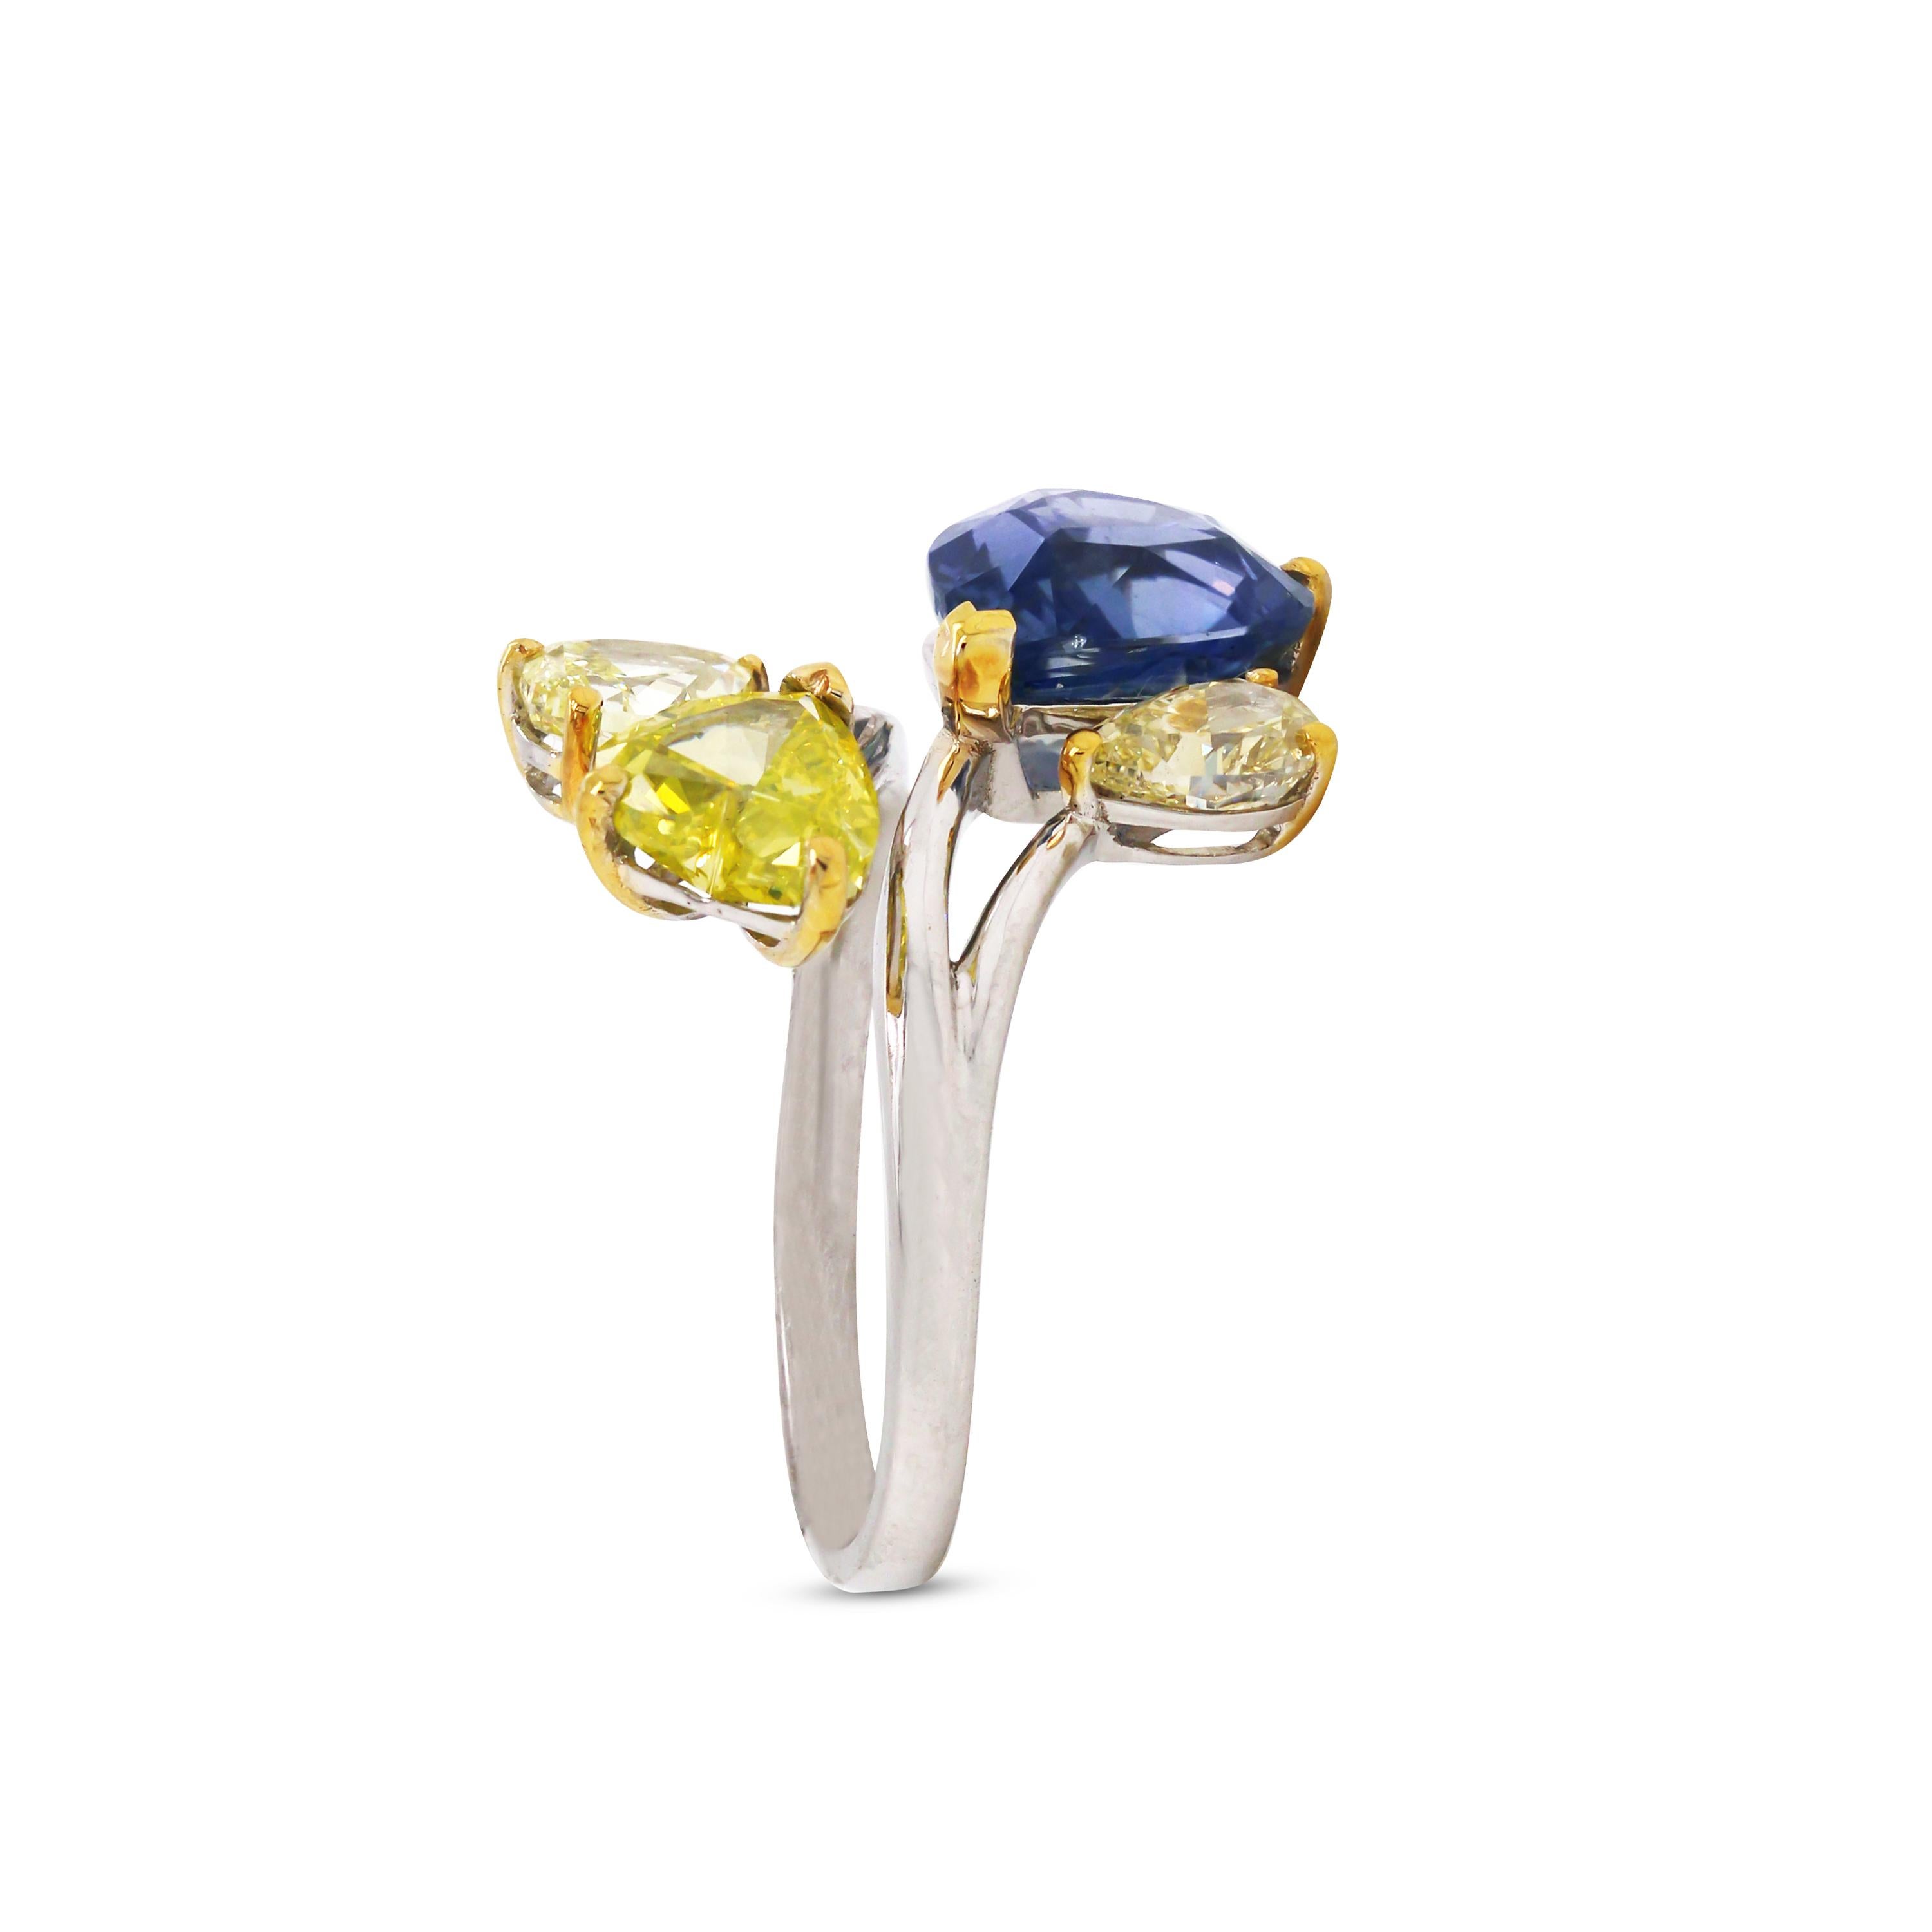 18K White Gold Three-Stone Ring with an AGL Certified Pear Shape Burma Sapphire and Fancy Yellow Diamonds

This one-of-a-kind ring features a natural, no-heat Sapphire certified by AGL.

Burma Sapphire: 5.05 carat, Pear Shape, No Heat, No Clarity